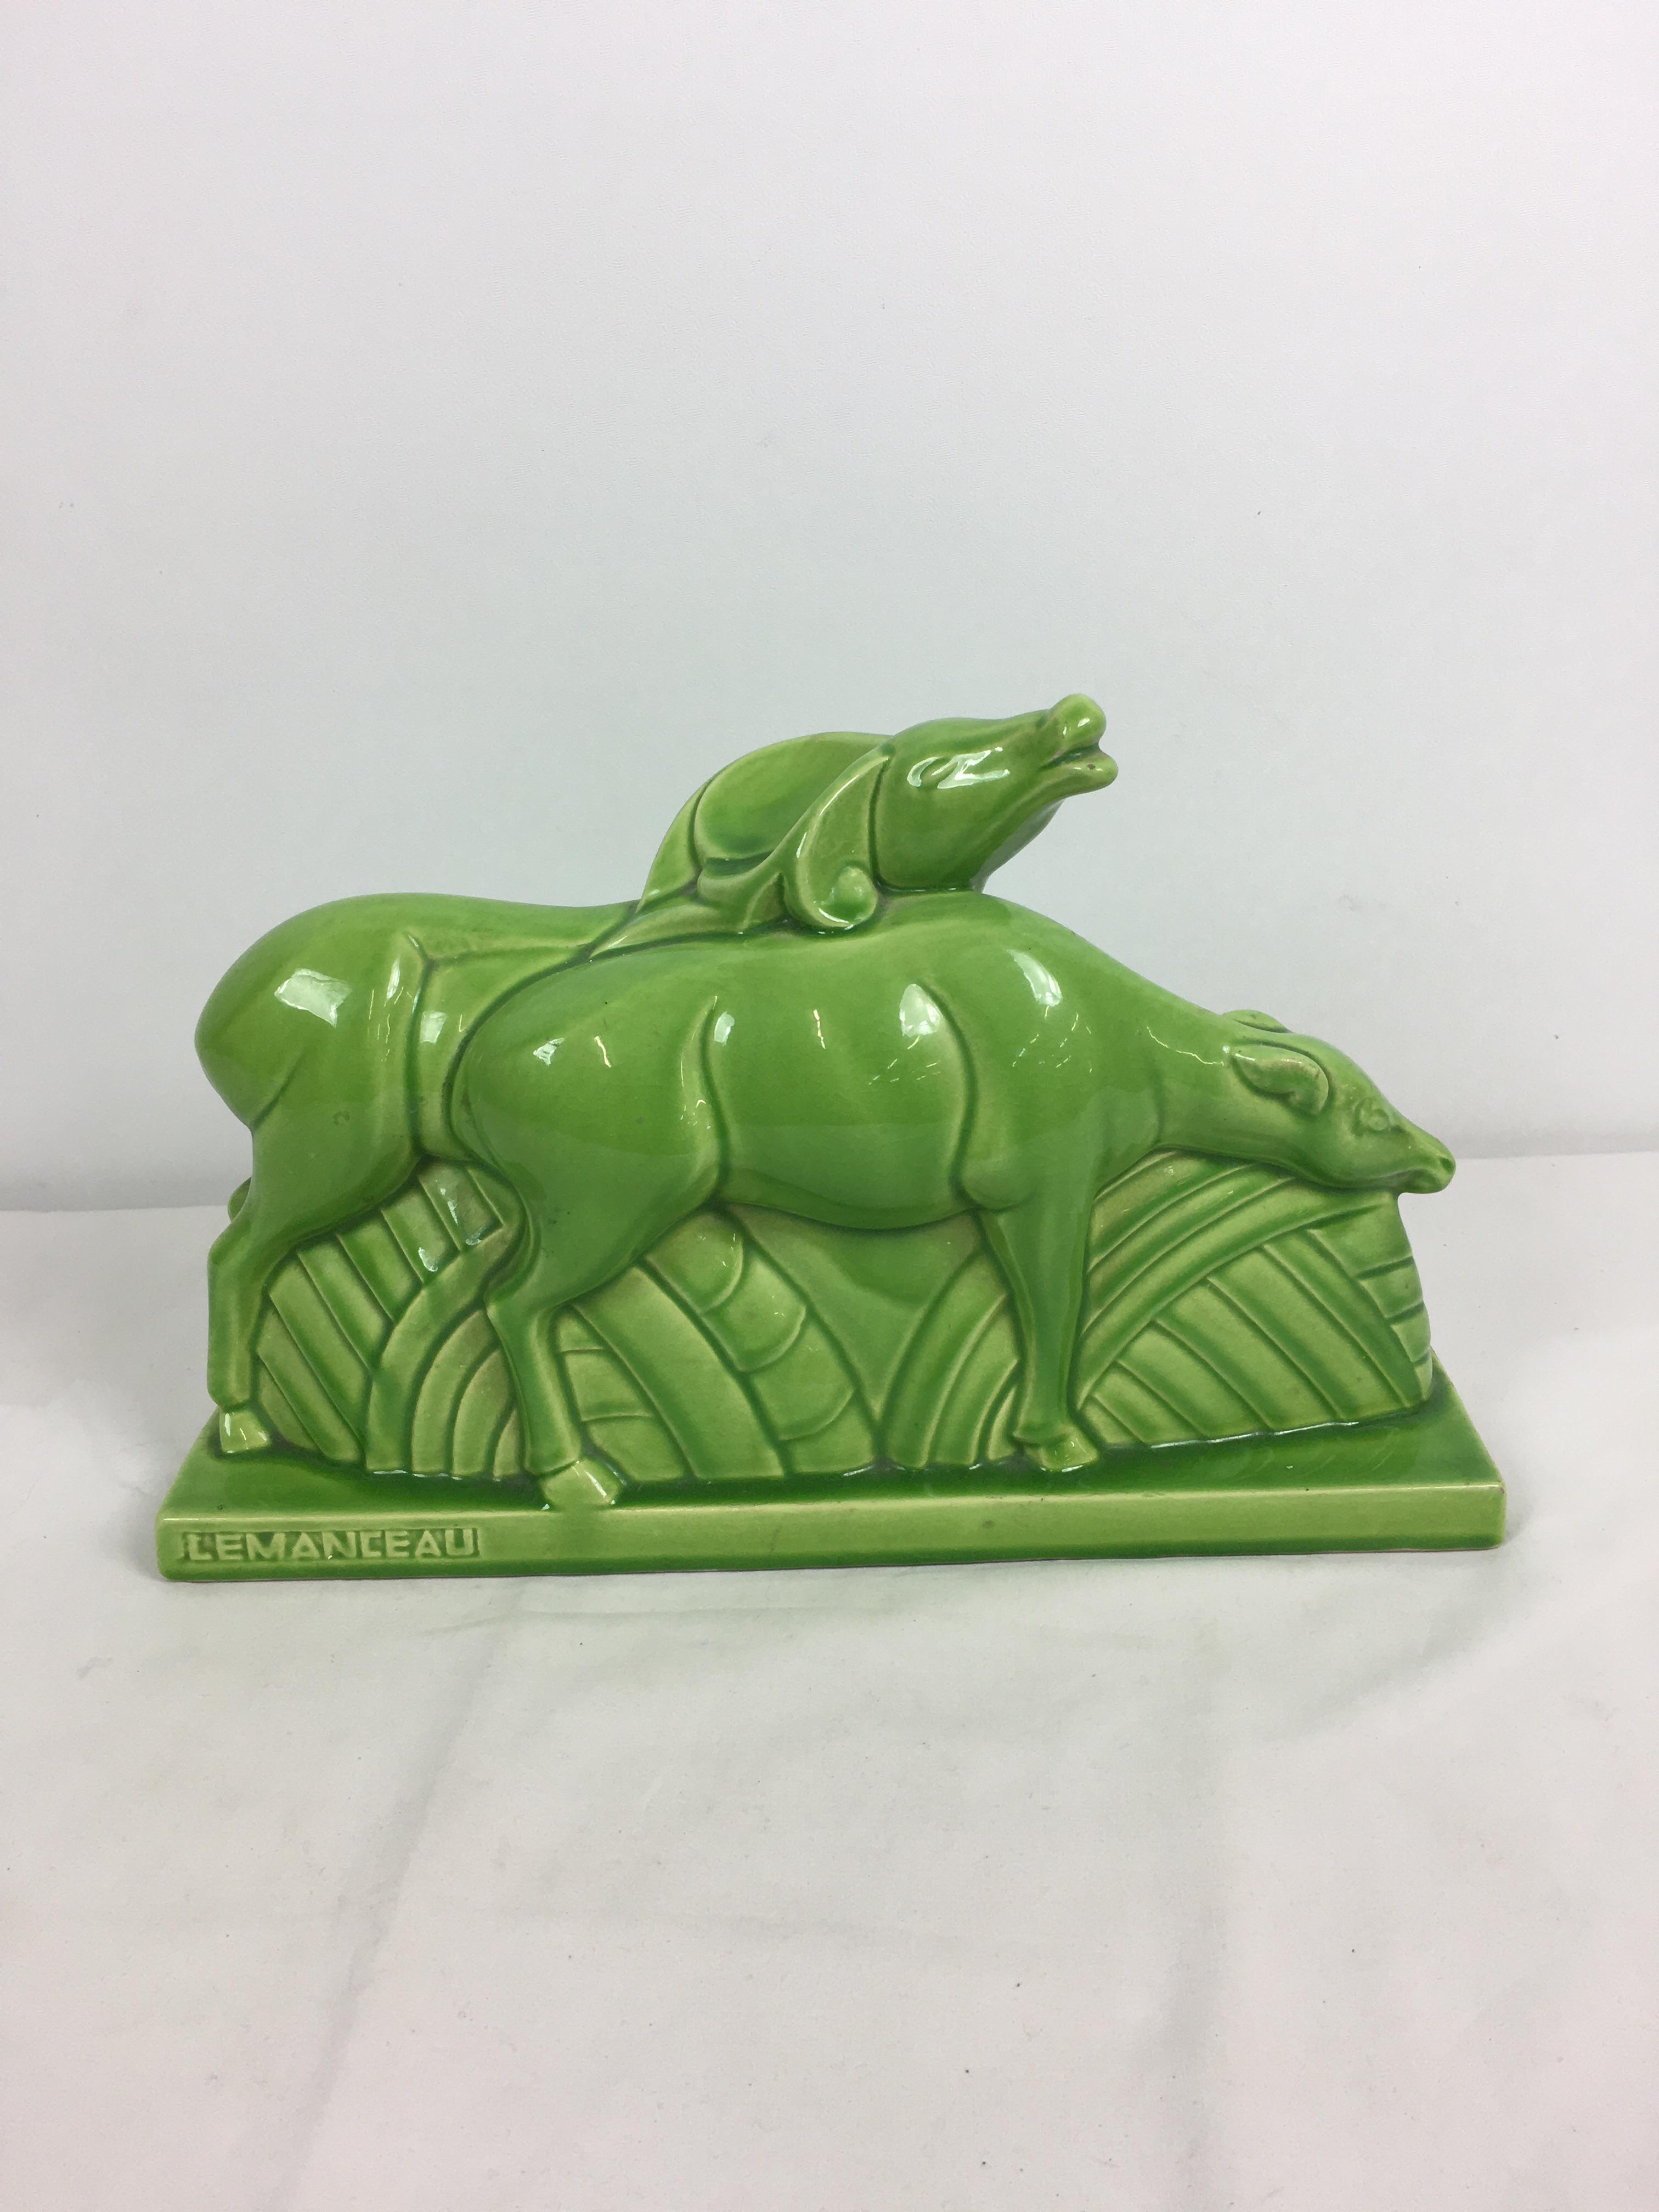 Charles Lemanceau - A French Art Deco green glazed pottery figure group of two stylized buffalo or - Image 2 of 11